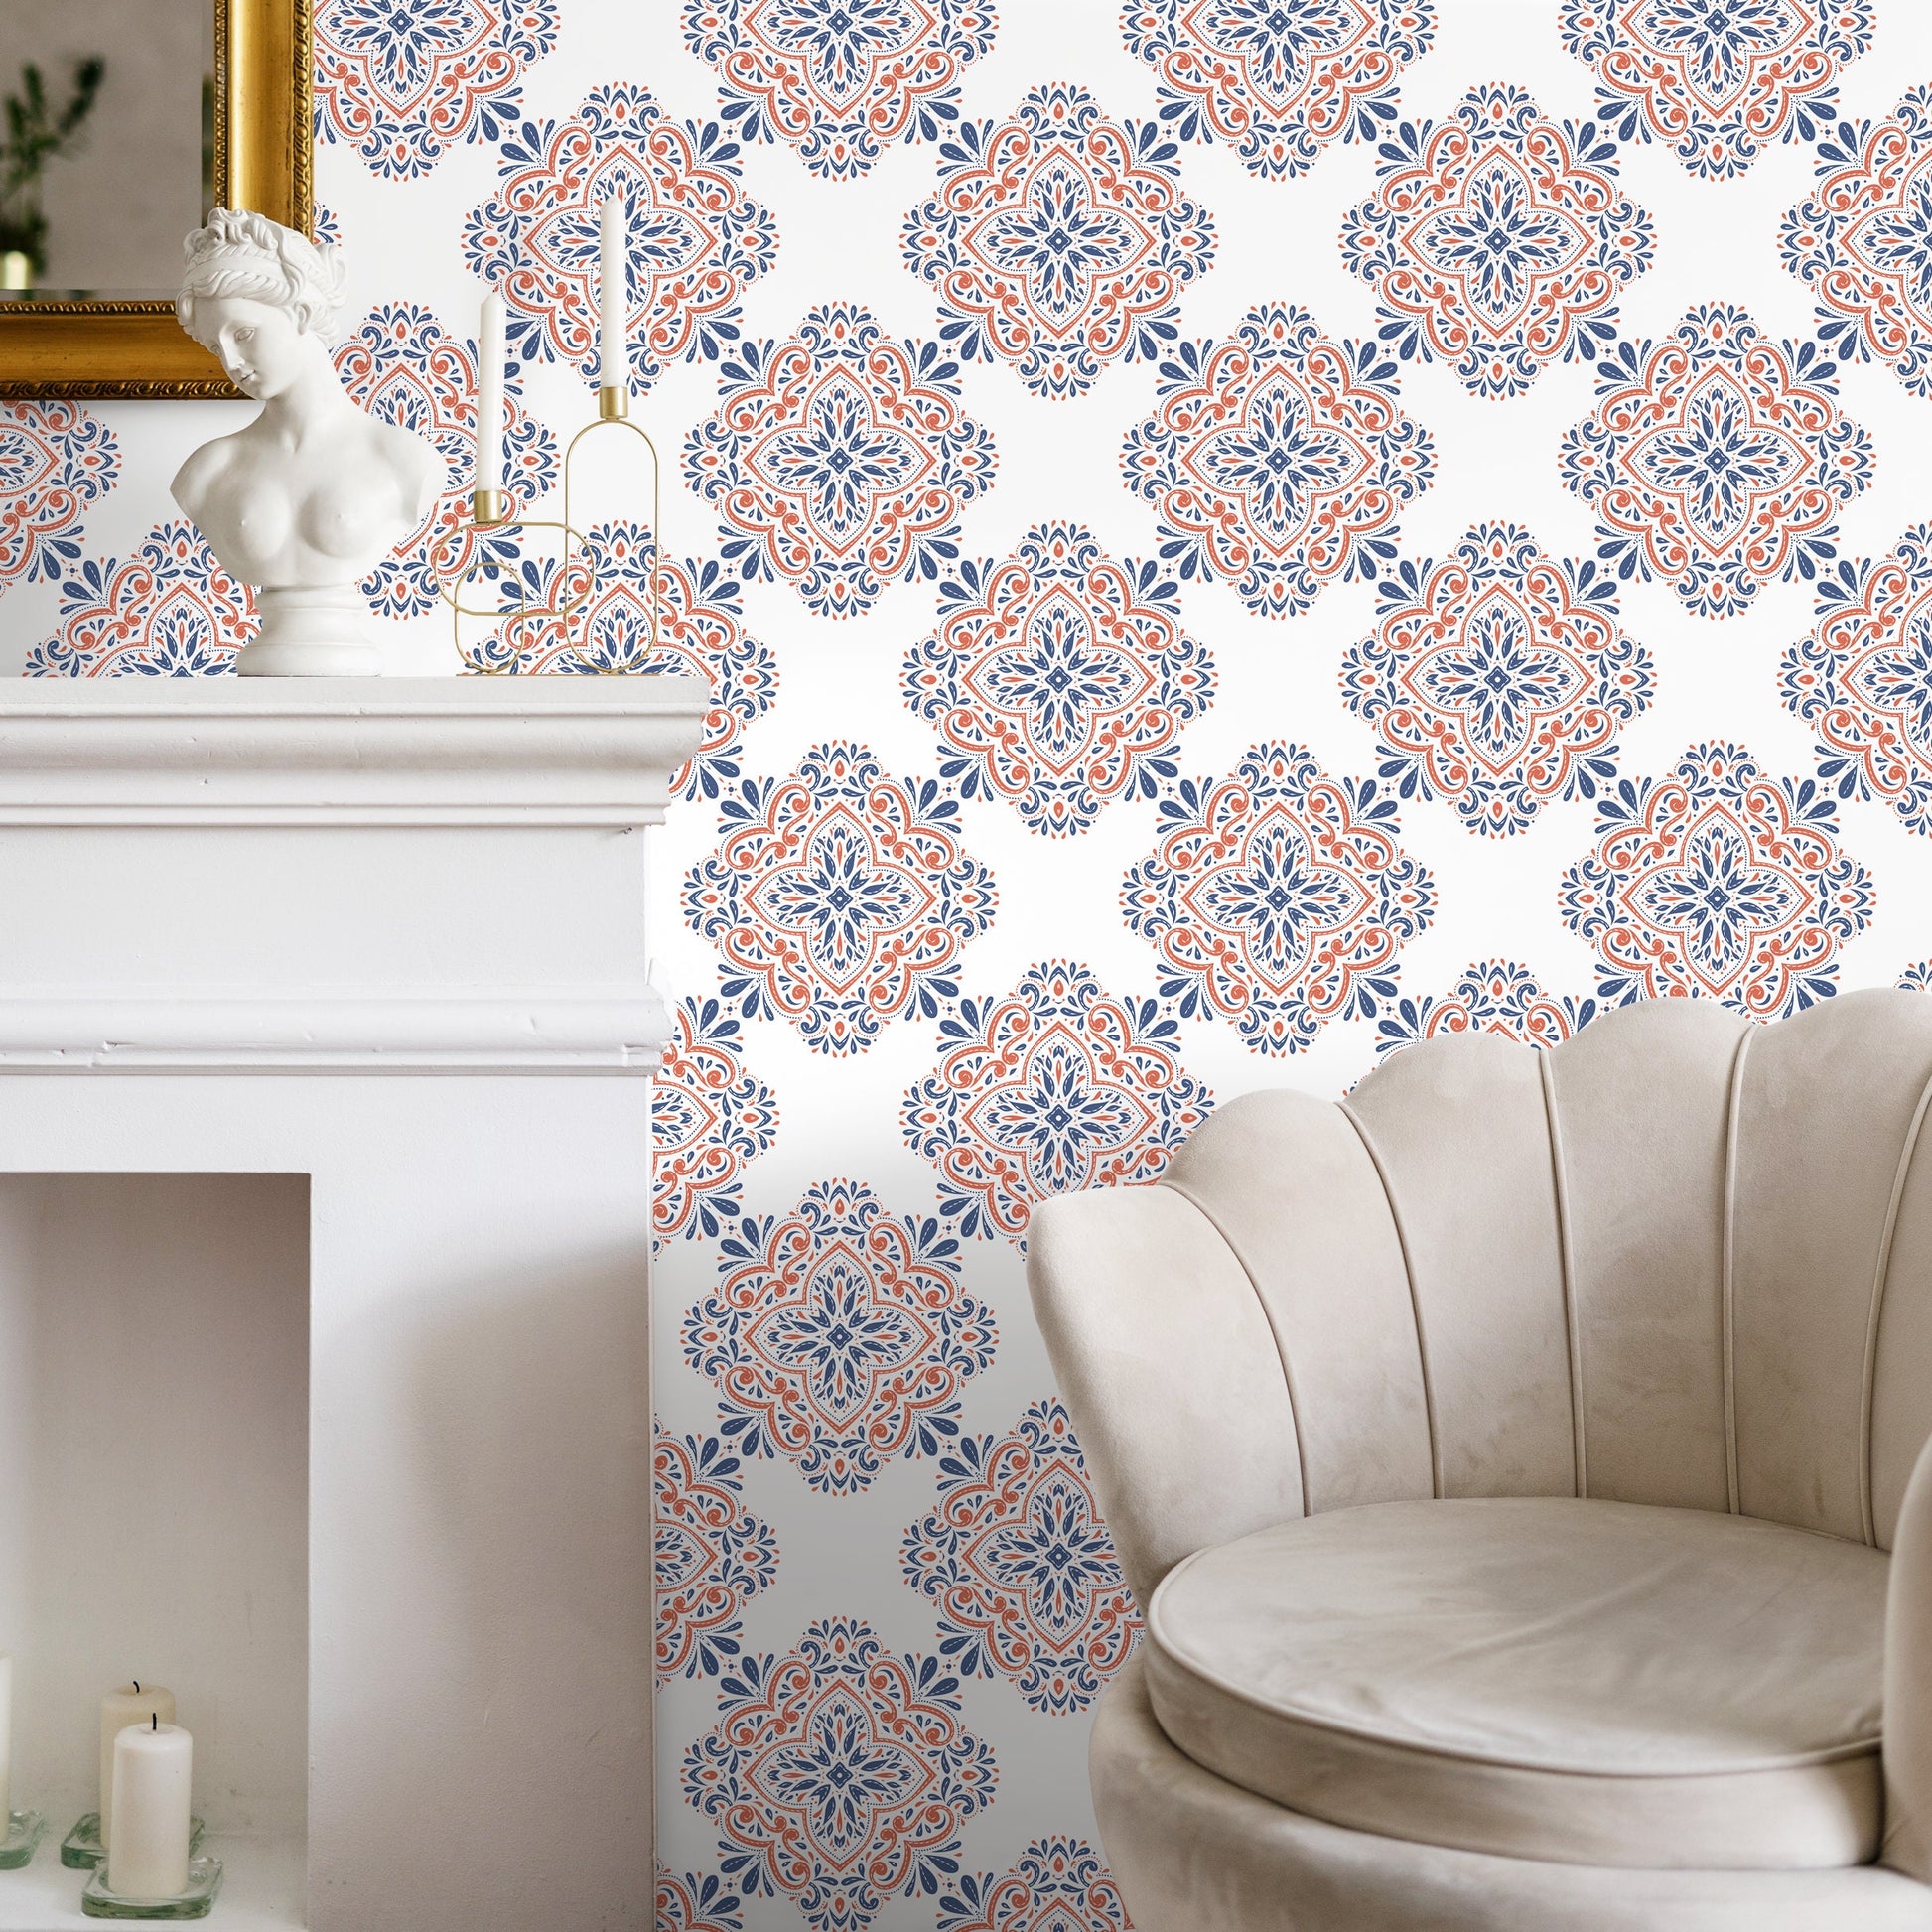 Contemporary Flowers Tile Wallpaper - Removable Wallpaper Peel and Stick Wallpaper Wall Paper - B335